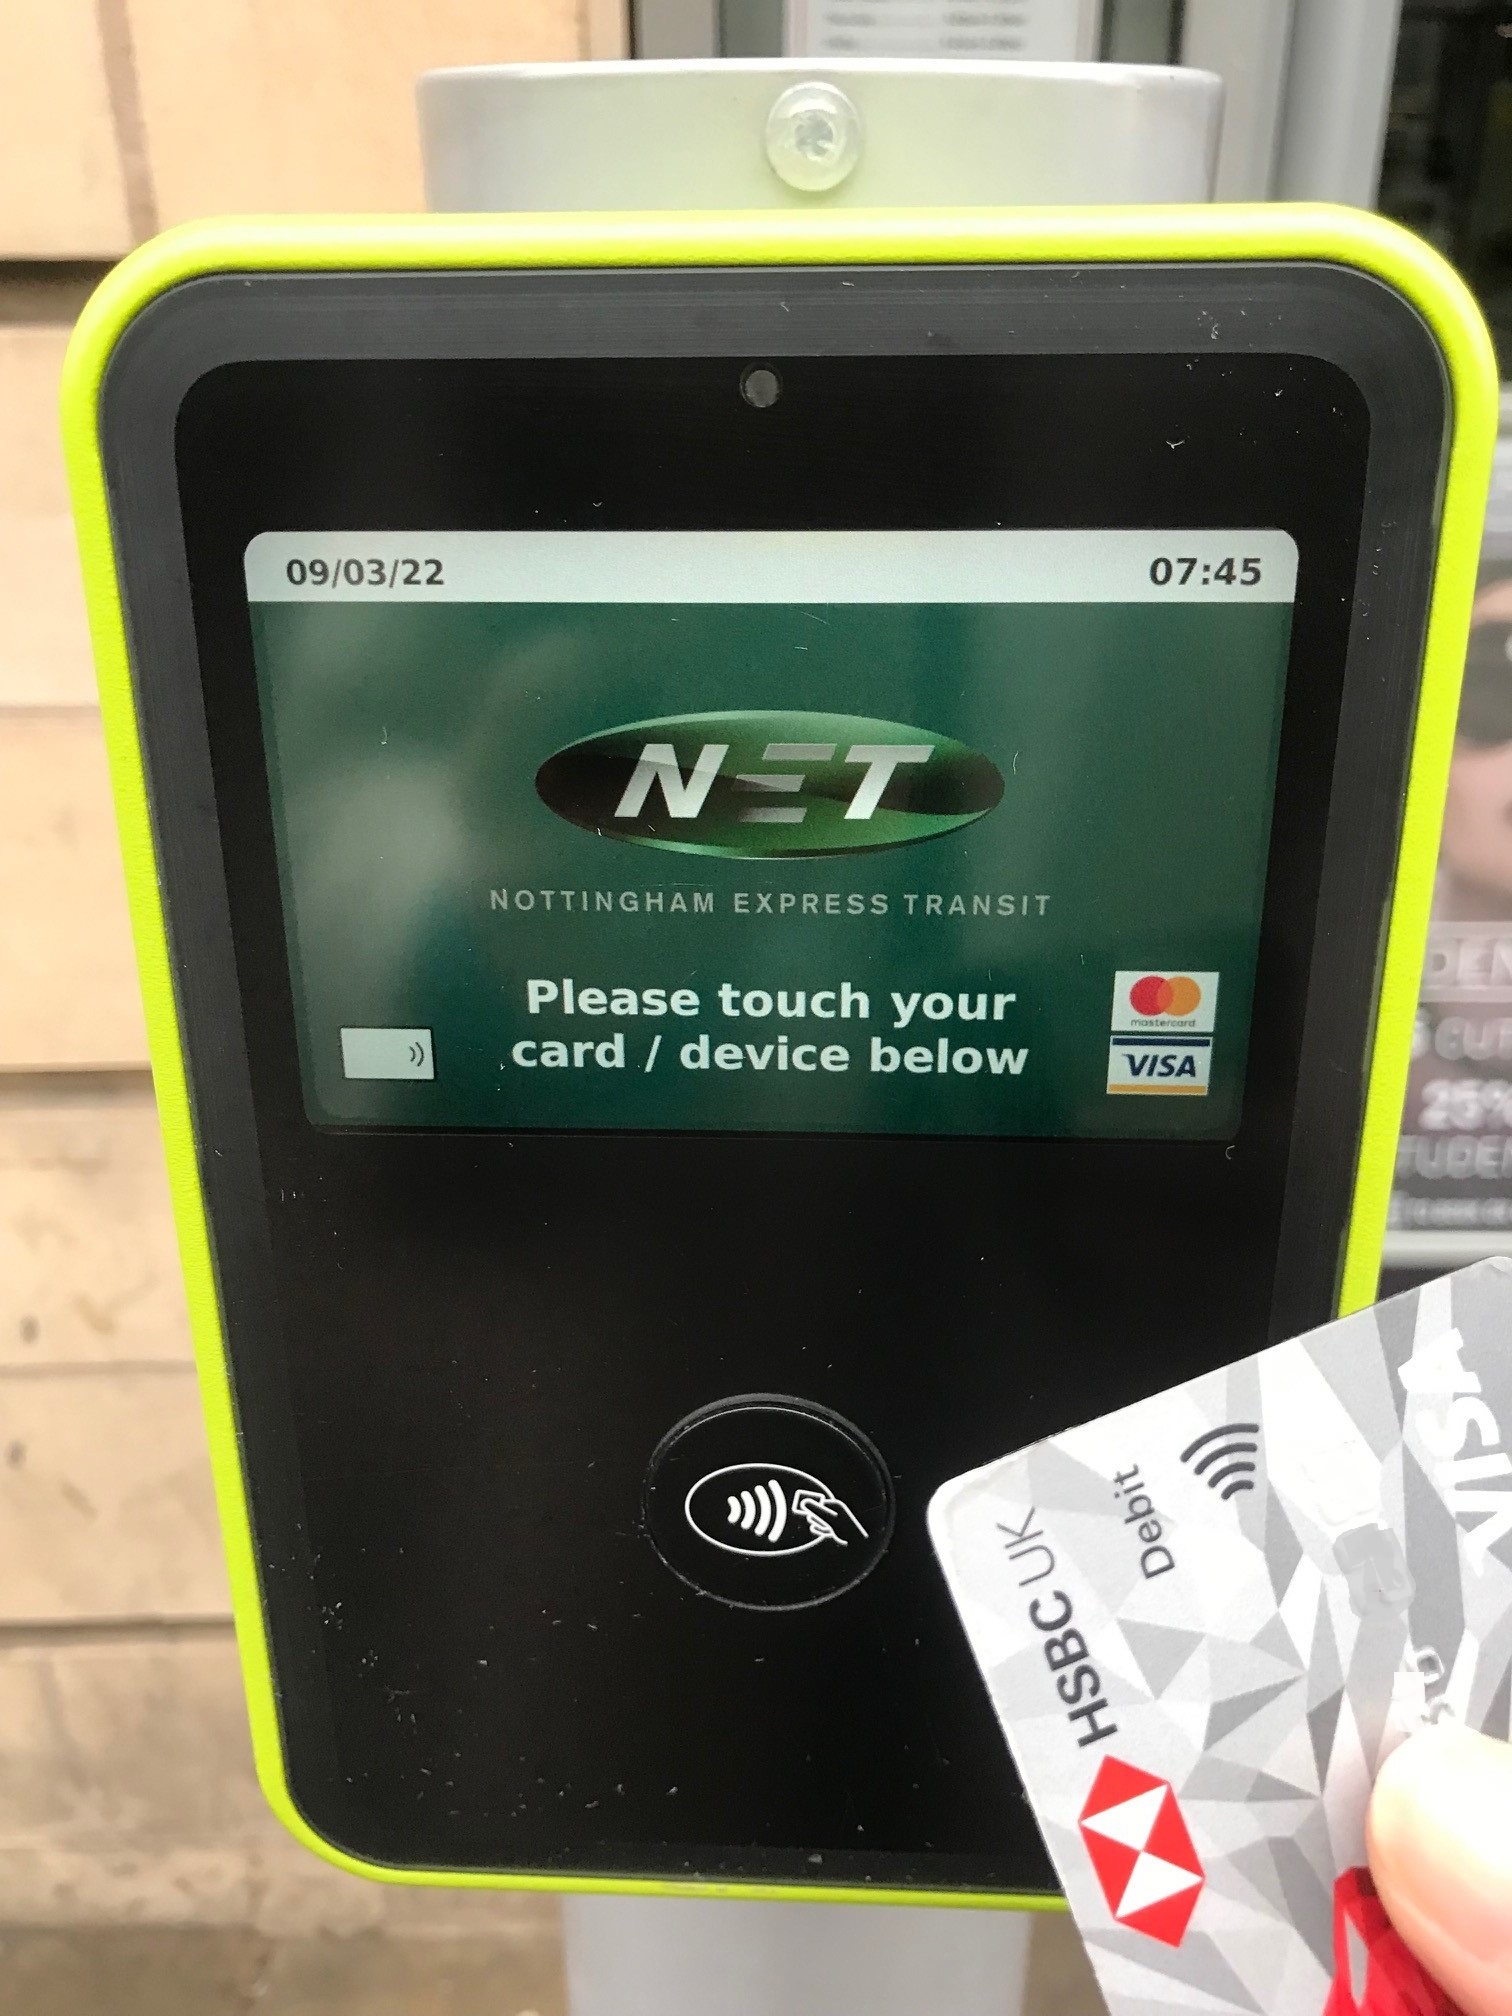 Contactless ticket validators can now be found across the NET tram network